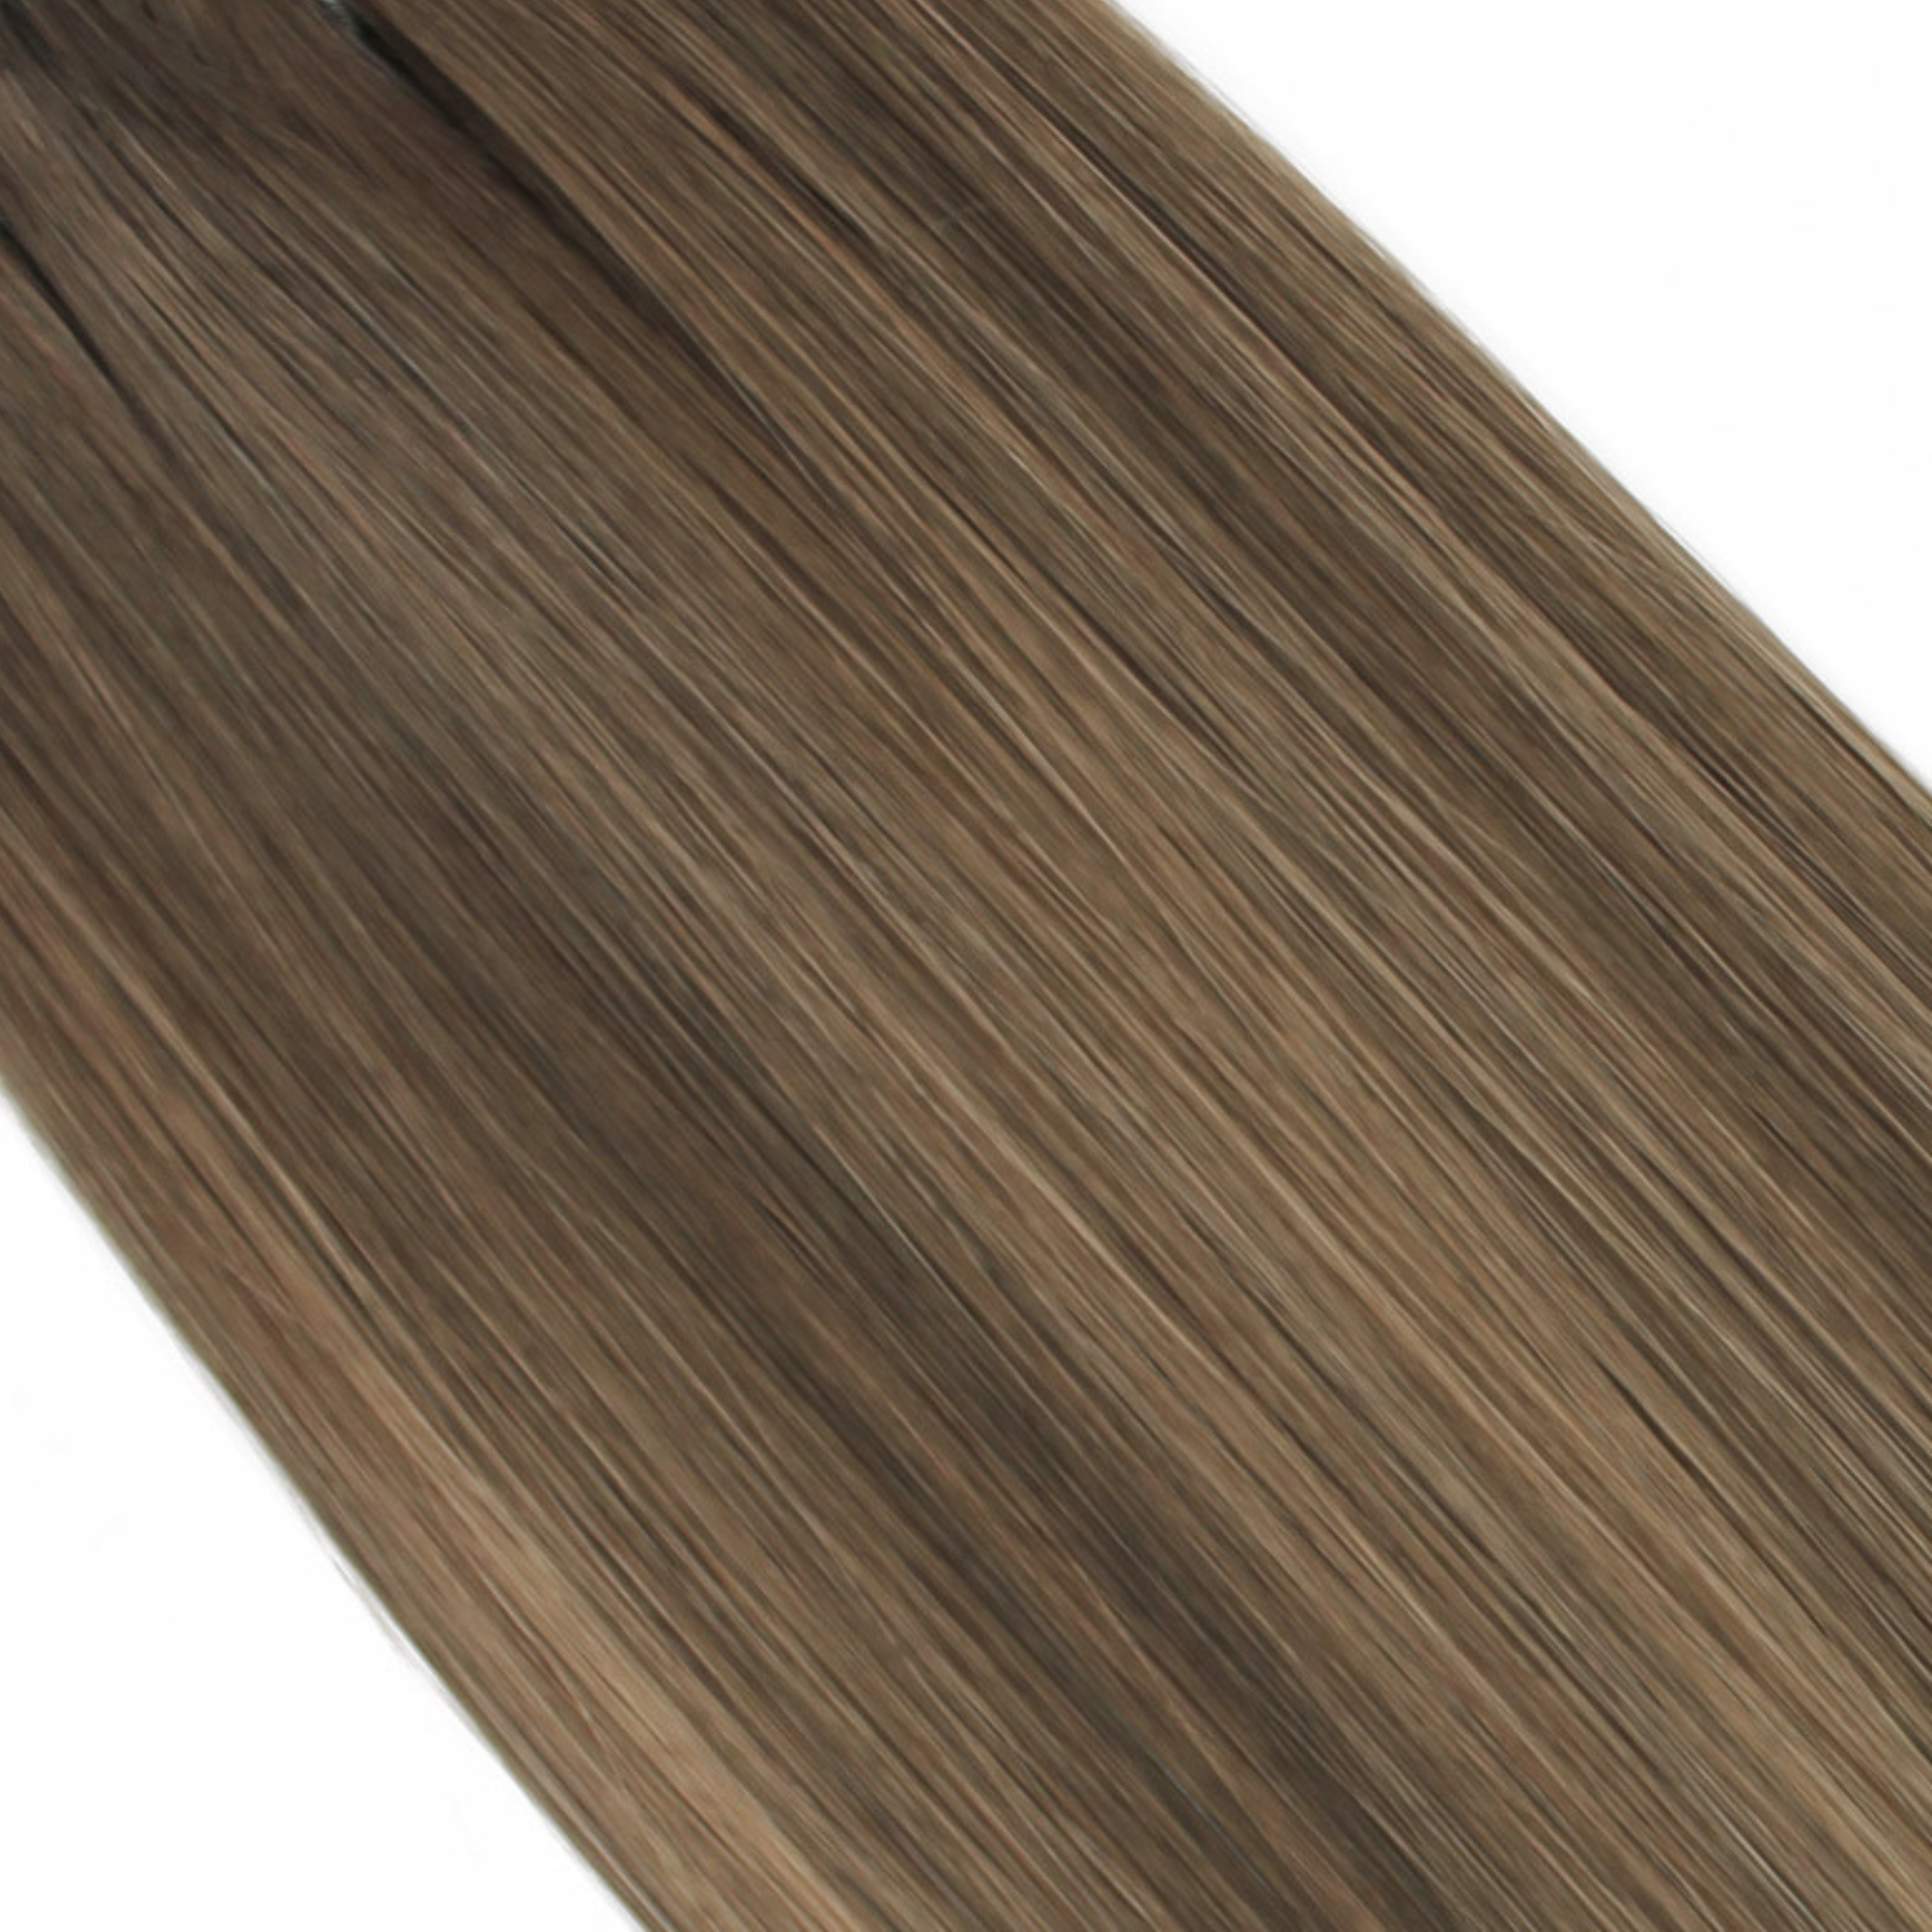 "hair rehab london 14" weft hair extensions shade swatch titled rooted caramel"